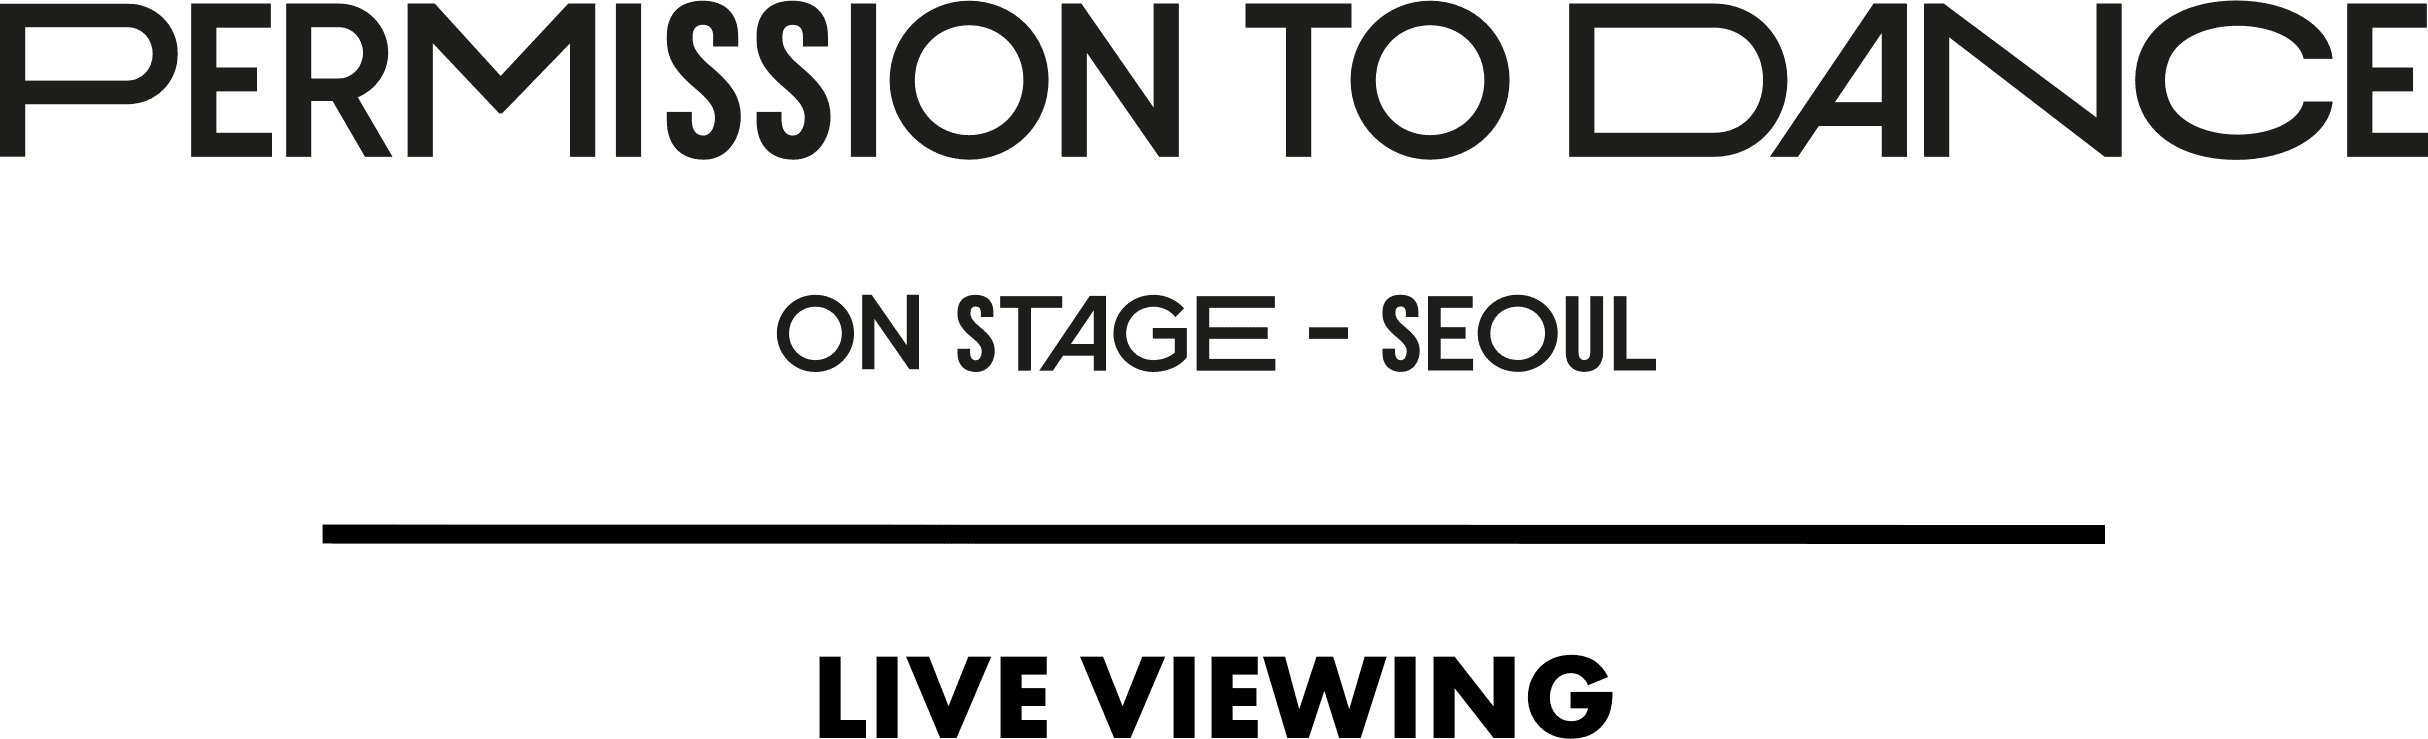 BTS Permission to Dance On Stage - Seoul: Live Viewing logo